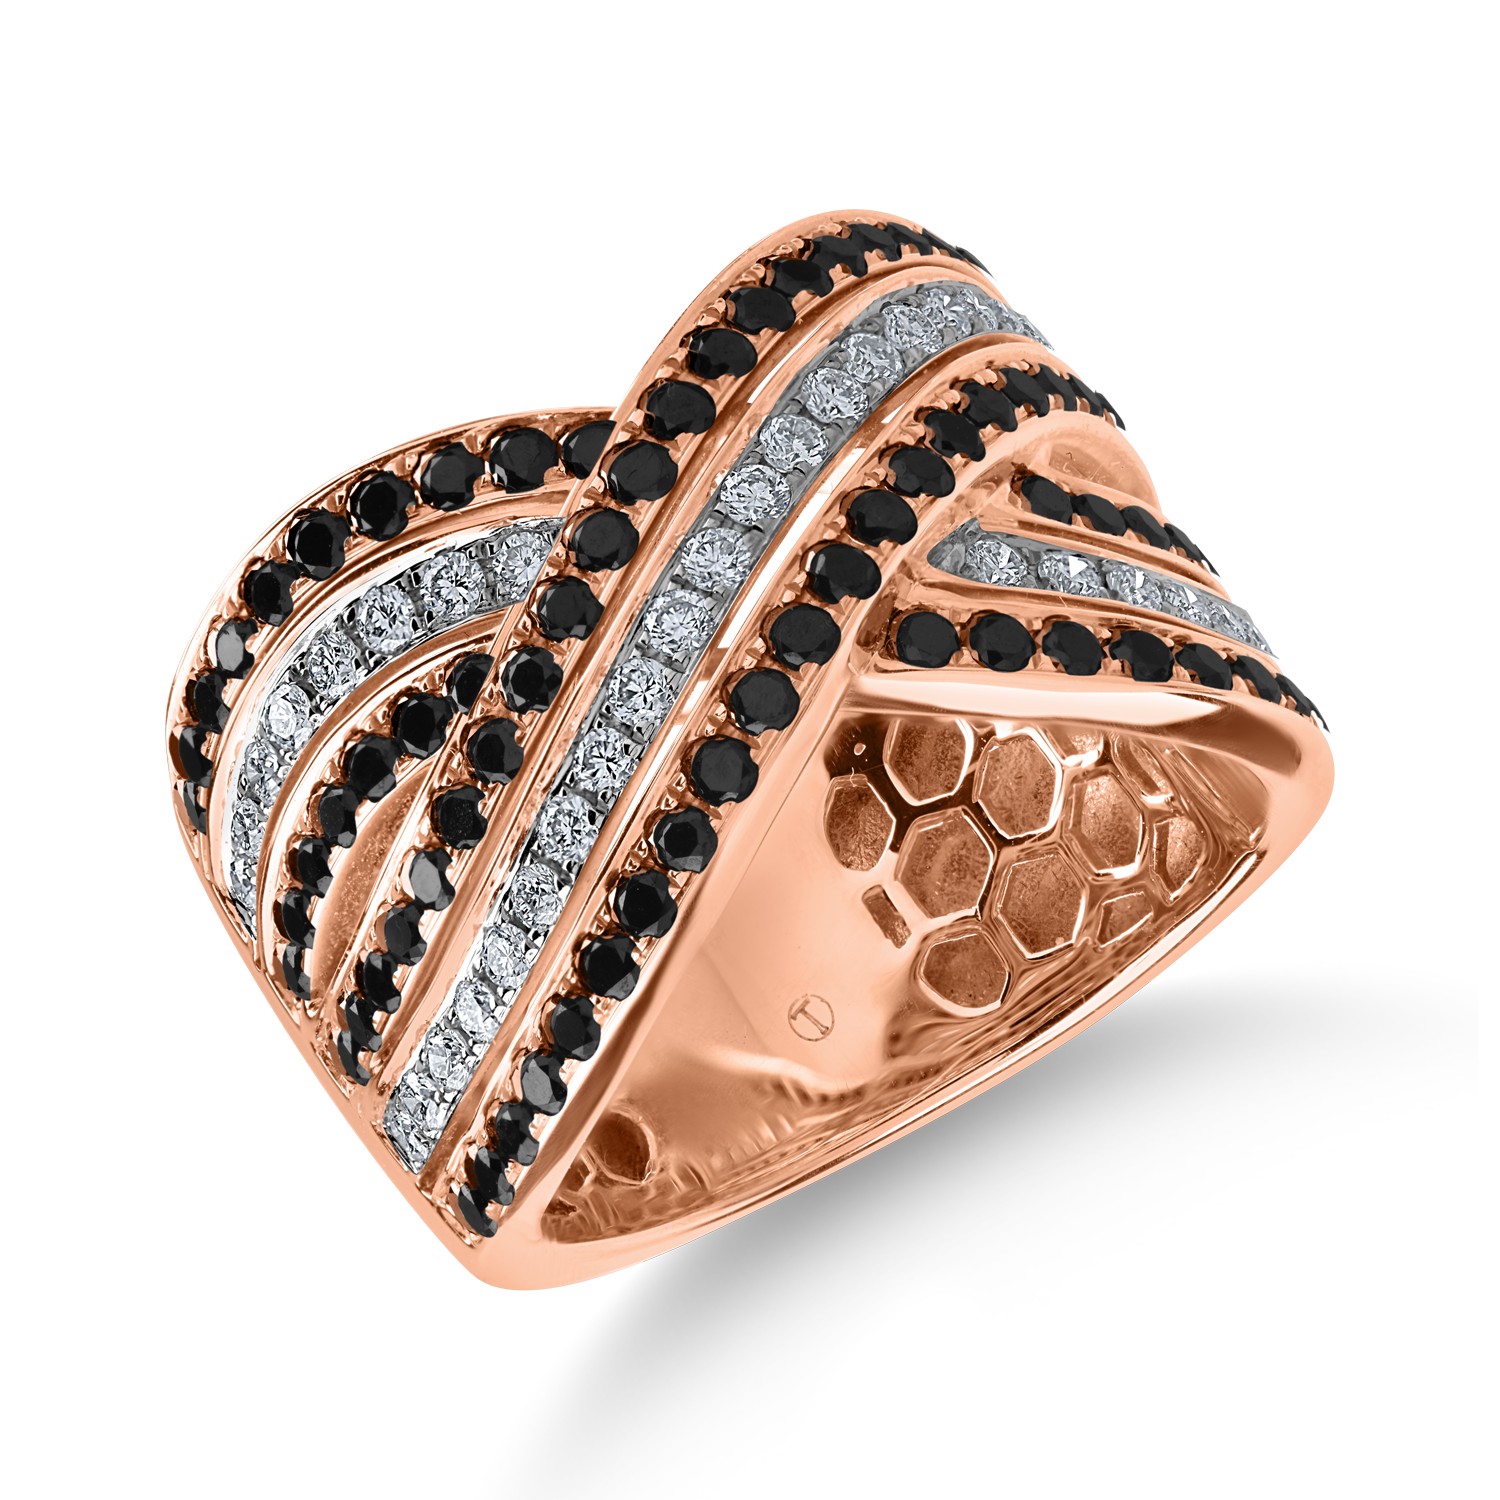 Rose gold ring with 1.5ct black and clear diamonds